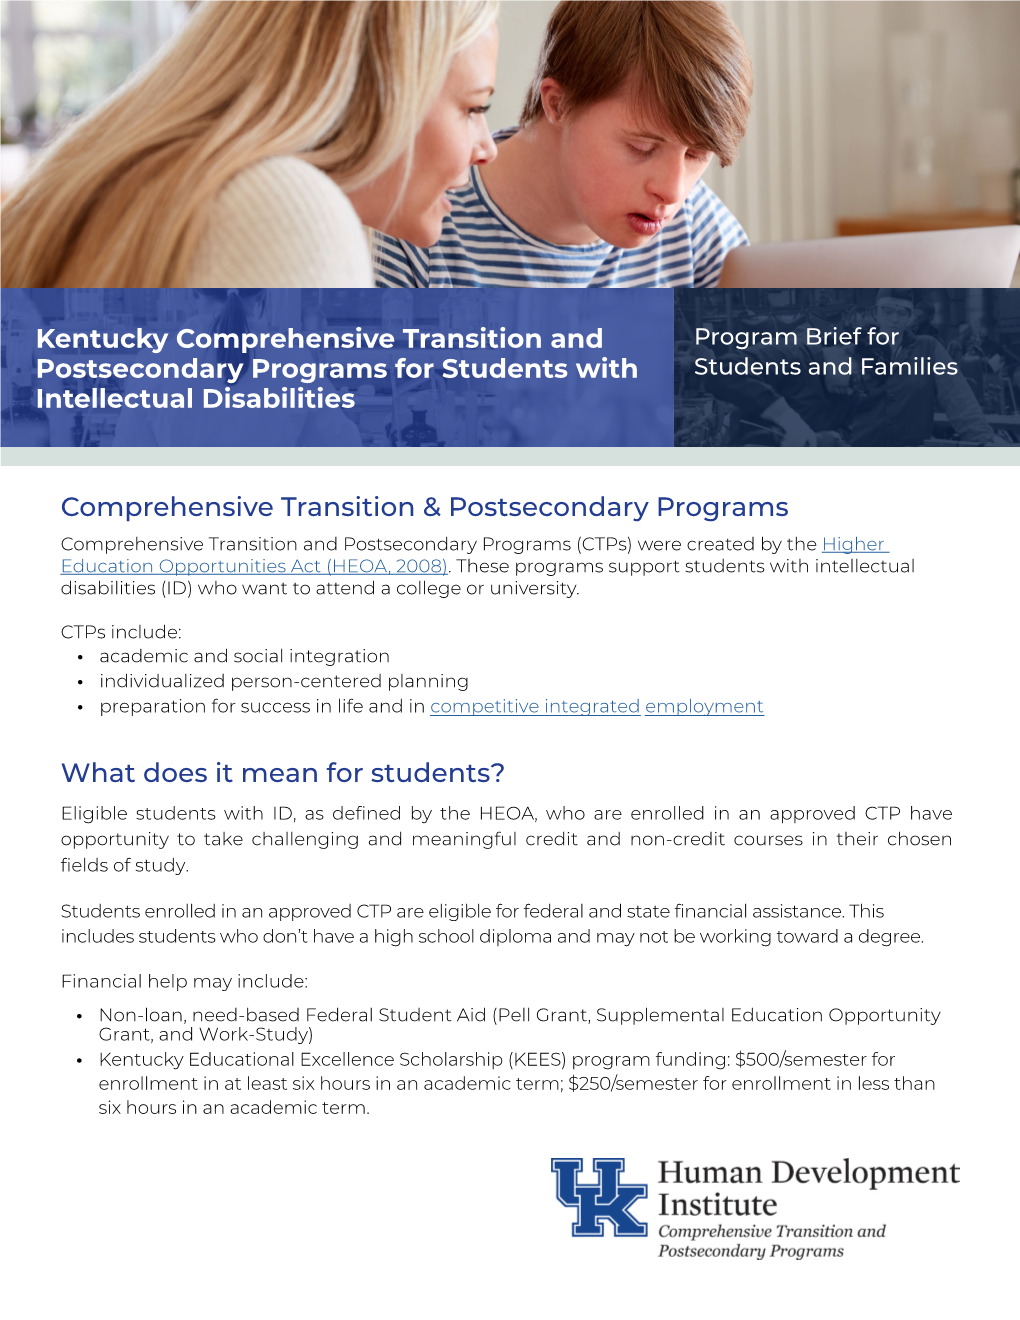 Kentucky Comprehensive Transition and Postsecondary Programs For